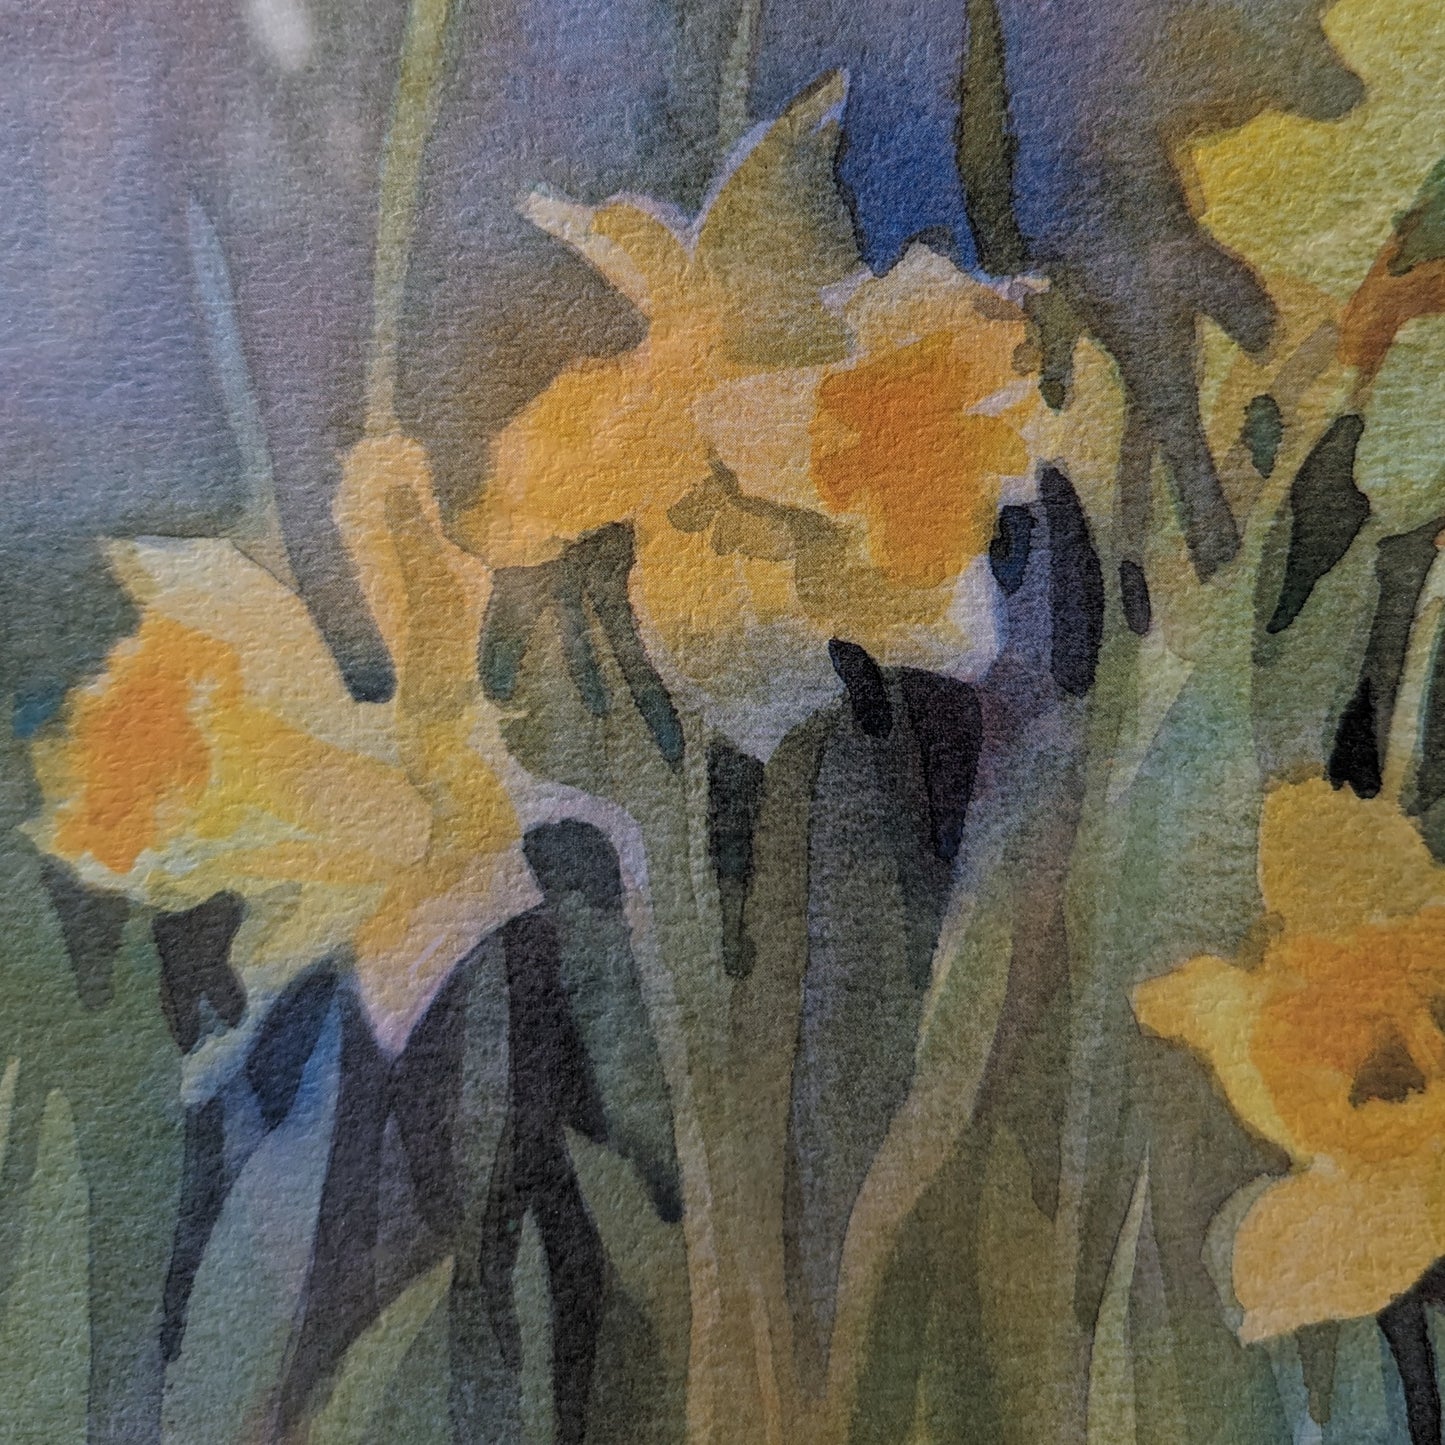 "Golden Daffodils" by Vera Beaumont Signed Edition Serigraph (2/200) 20"x24"